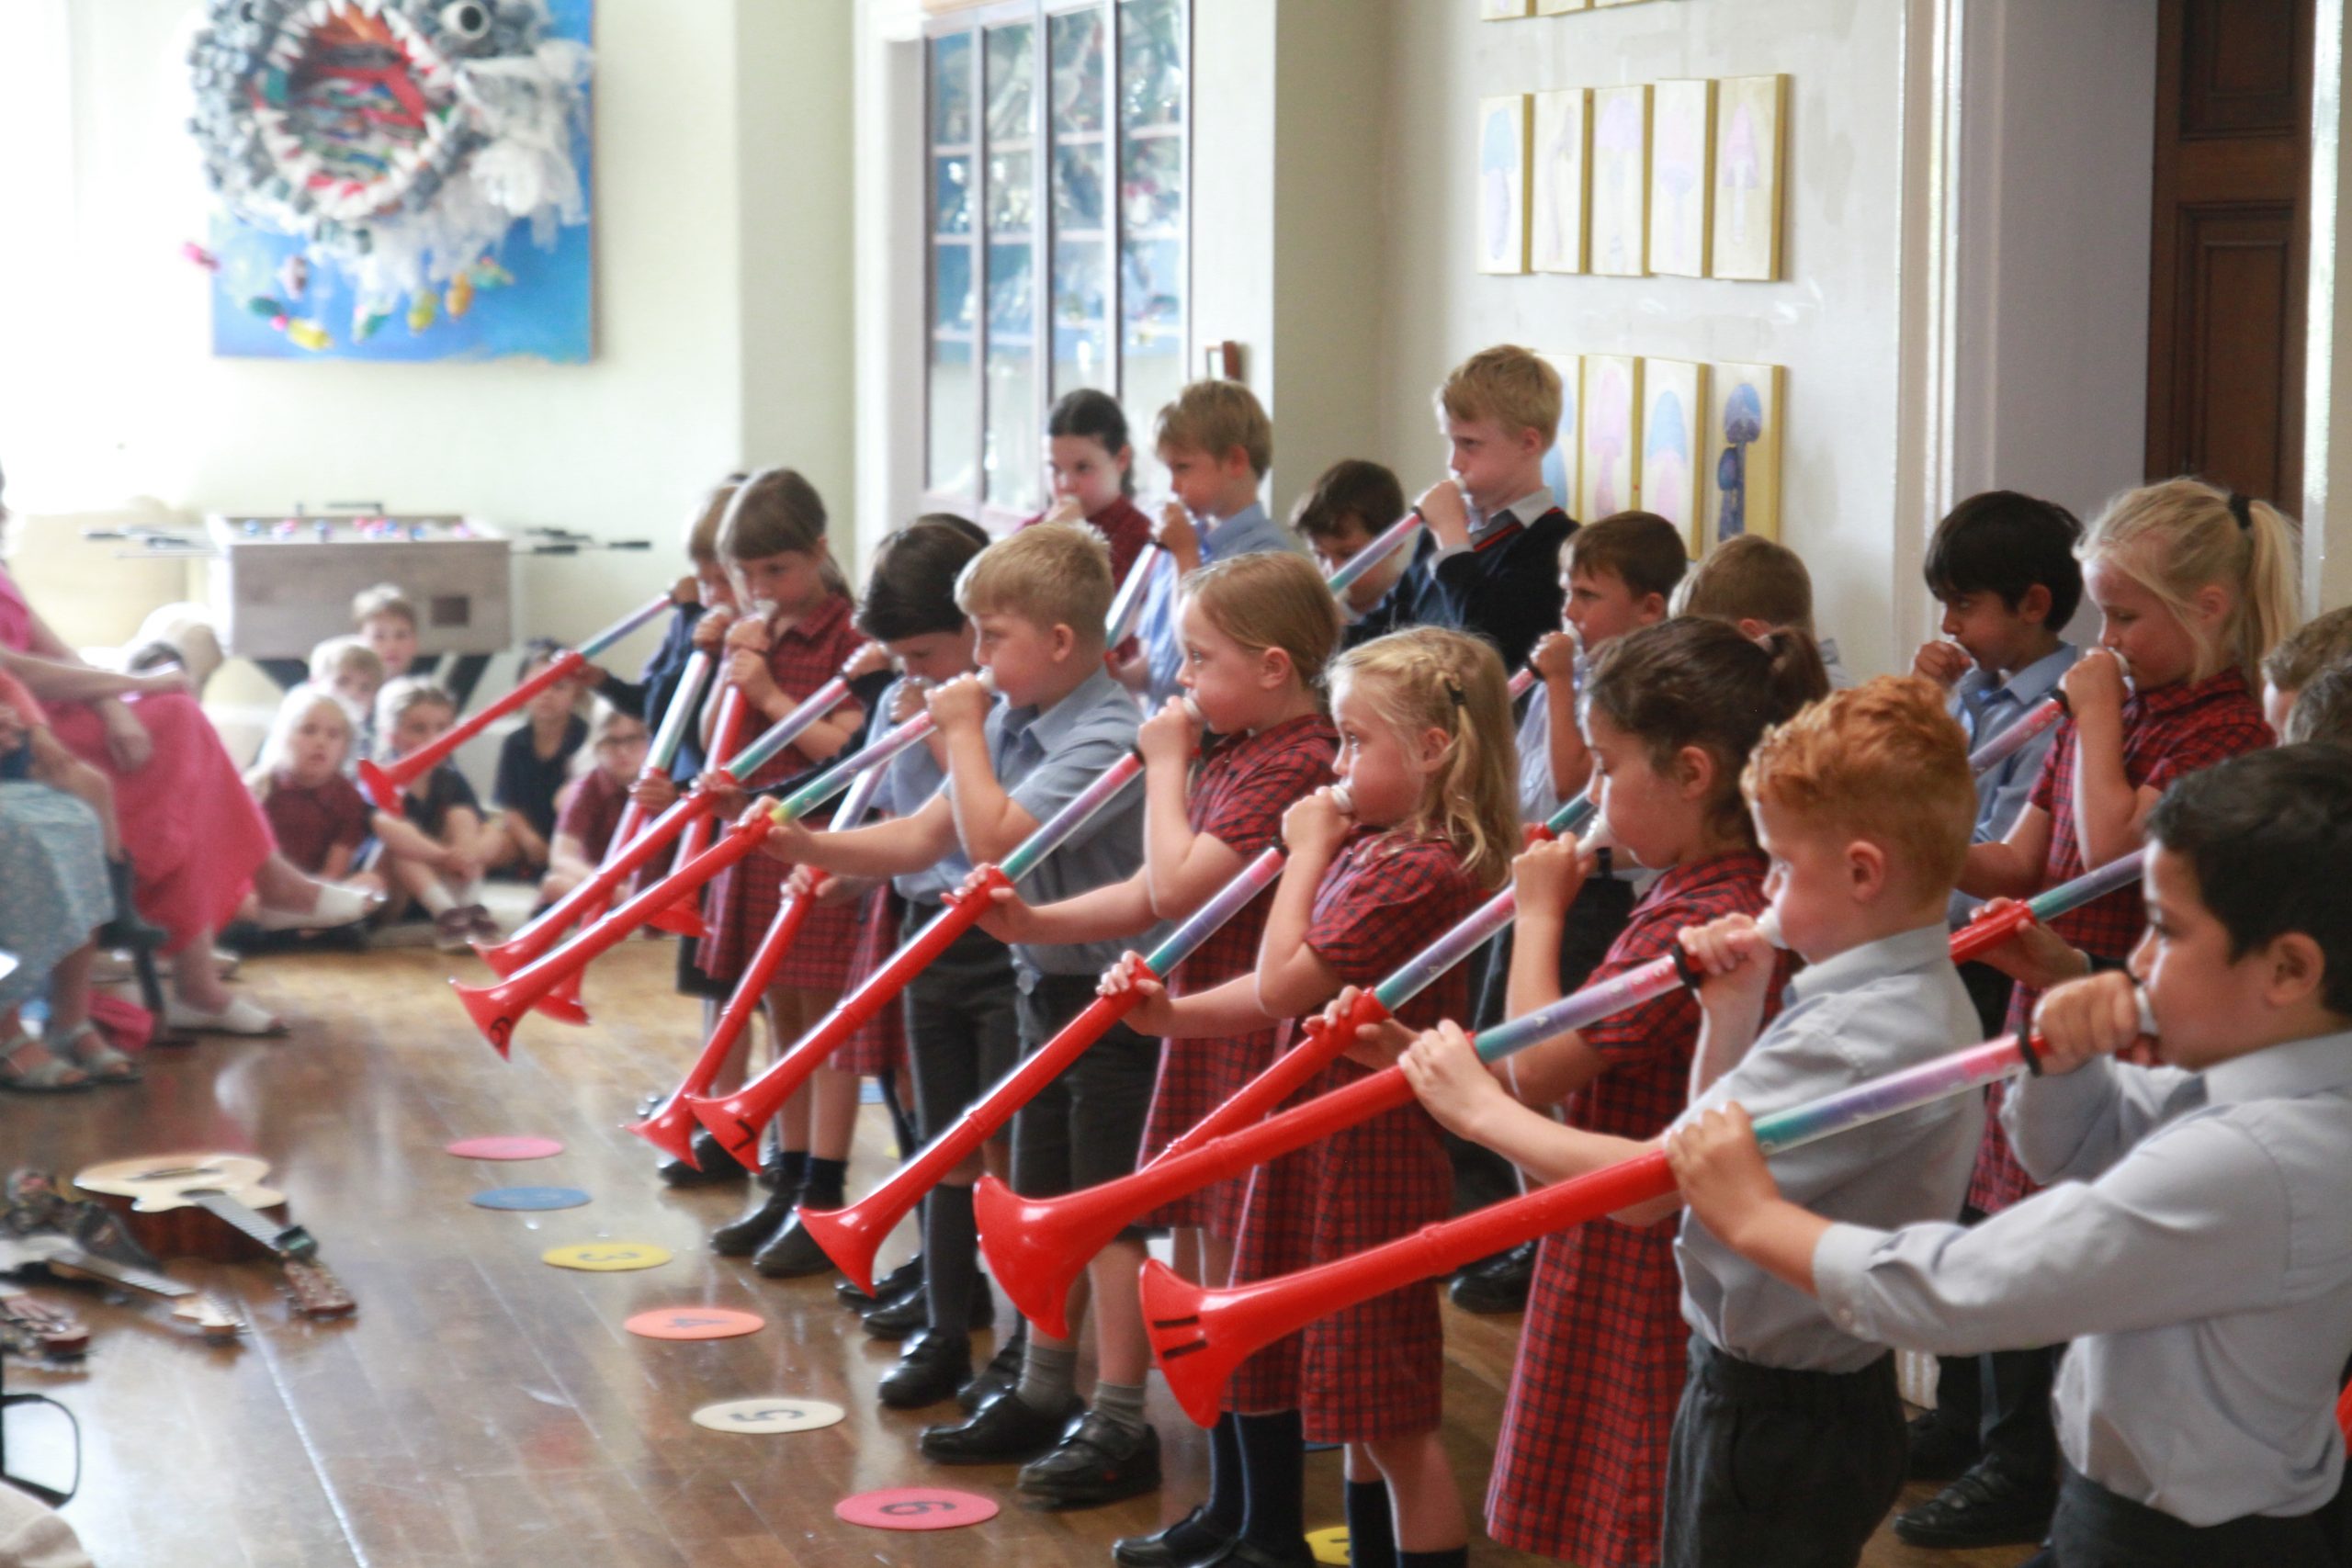 Students playing with large plastic trumpets